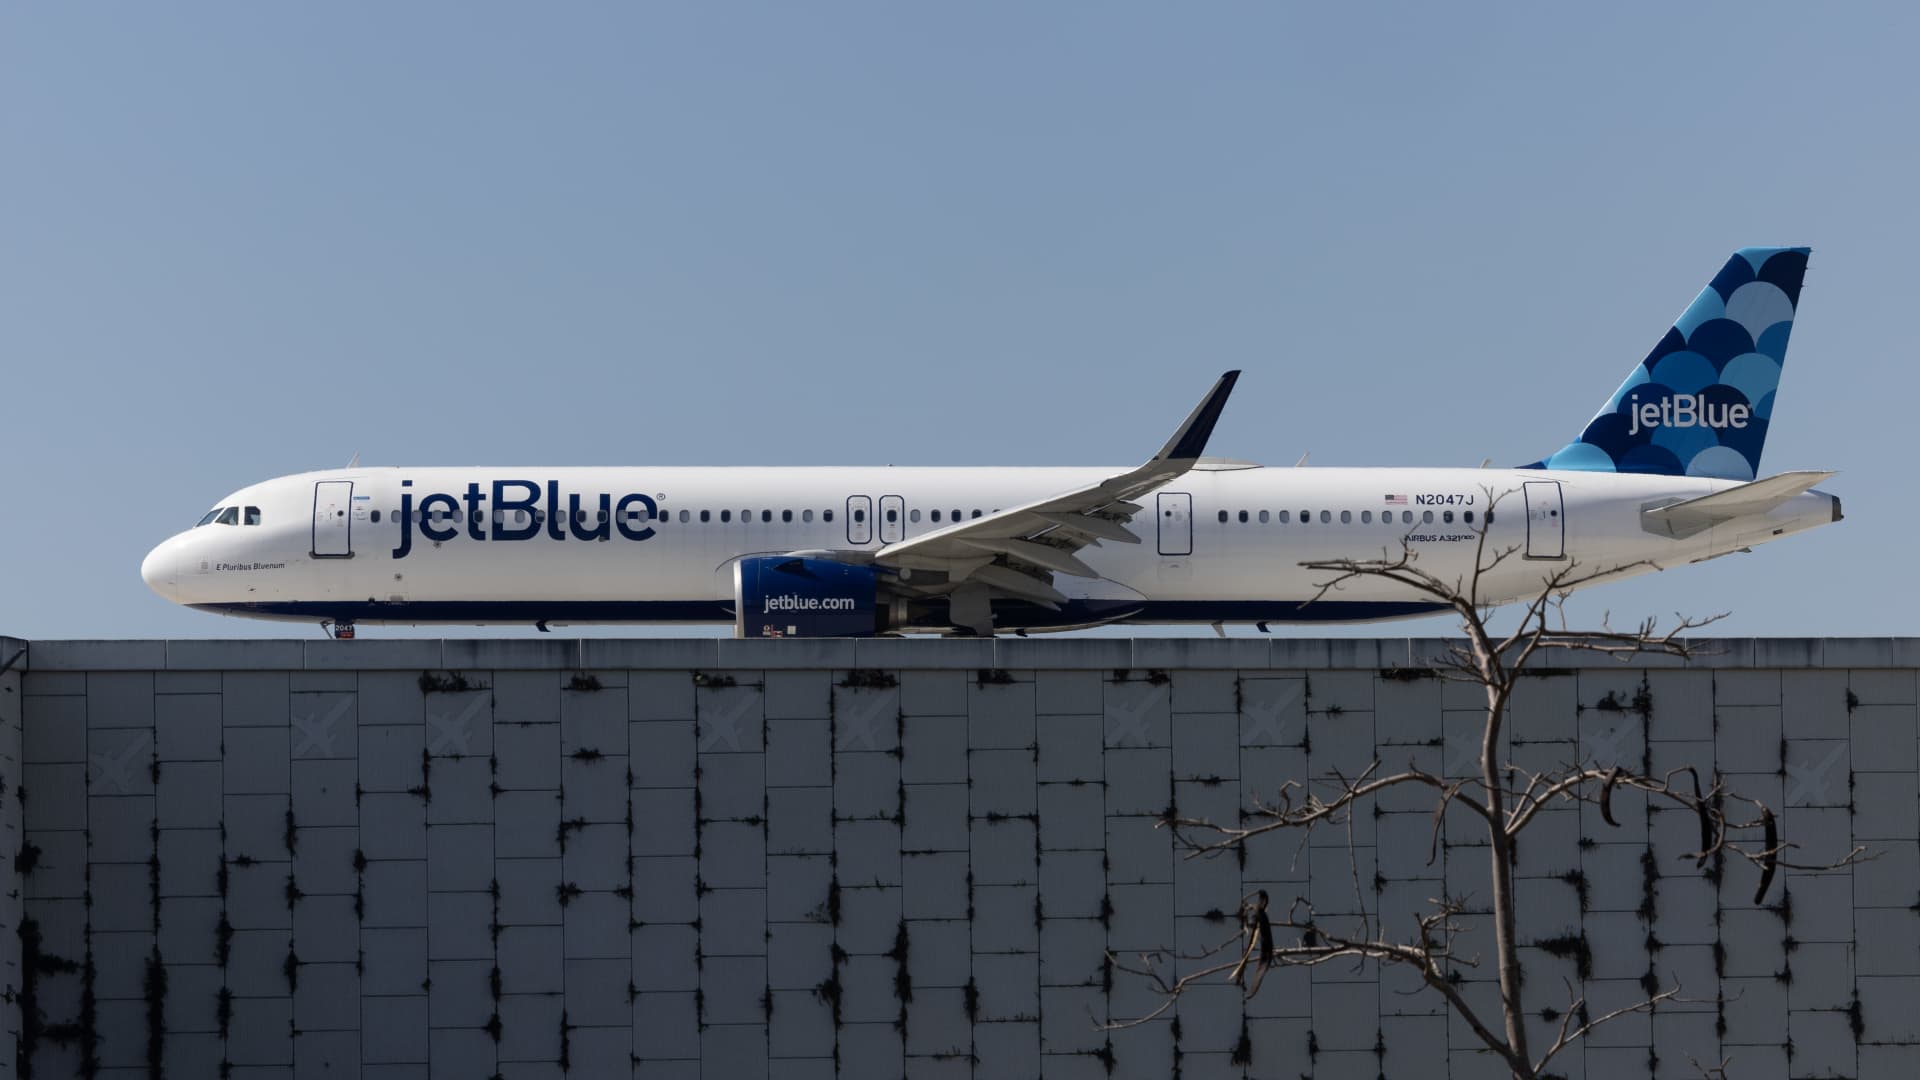 Carl Icahn wins seats on JetBlue board after taking stake in airline